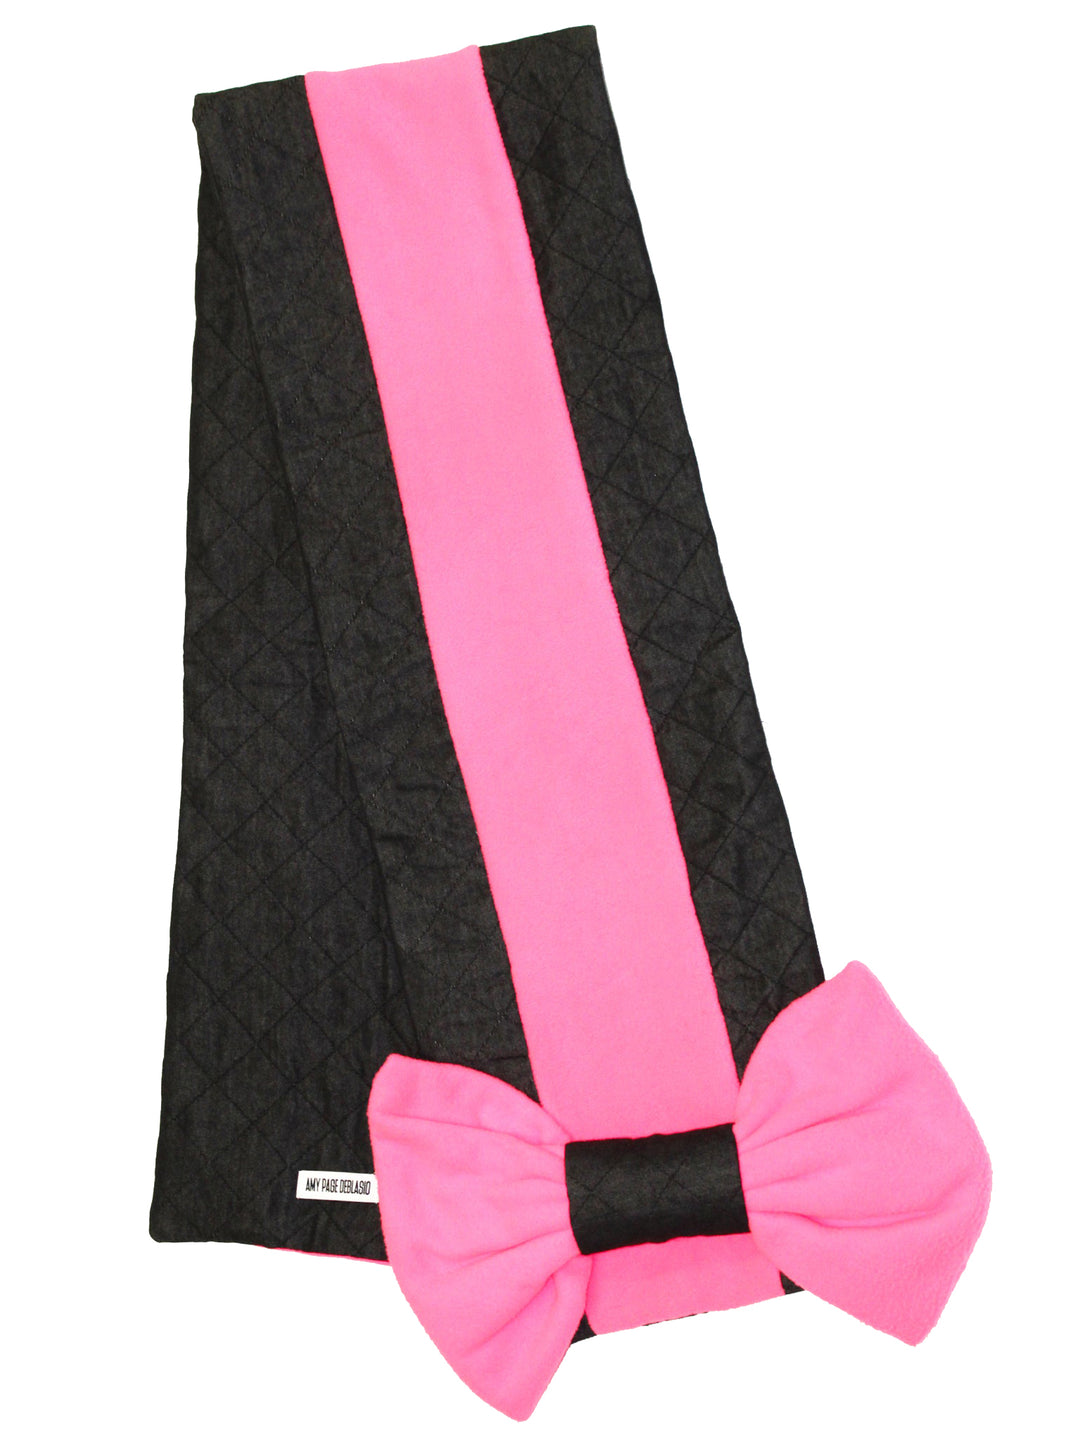 Bow Scarf in Black and Neon Pink (60% OFF)